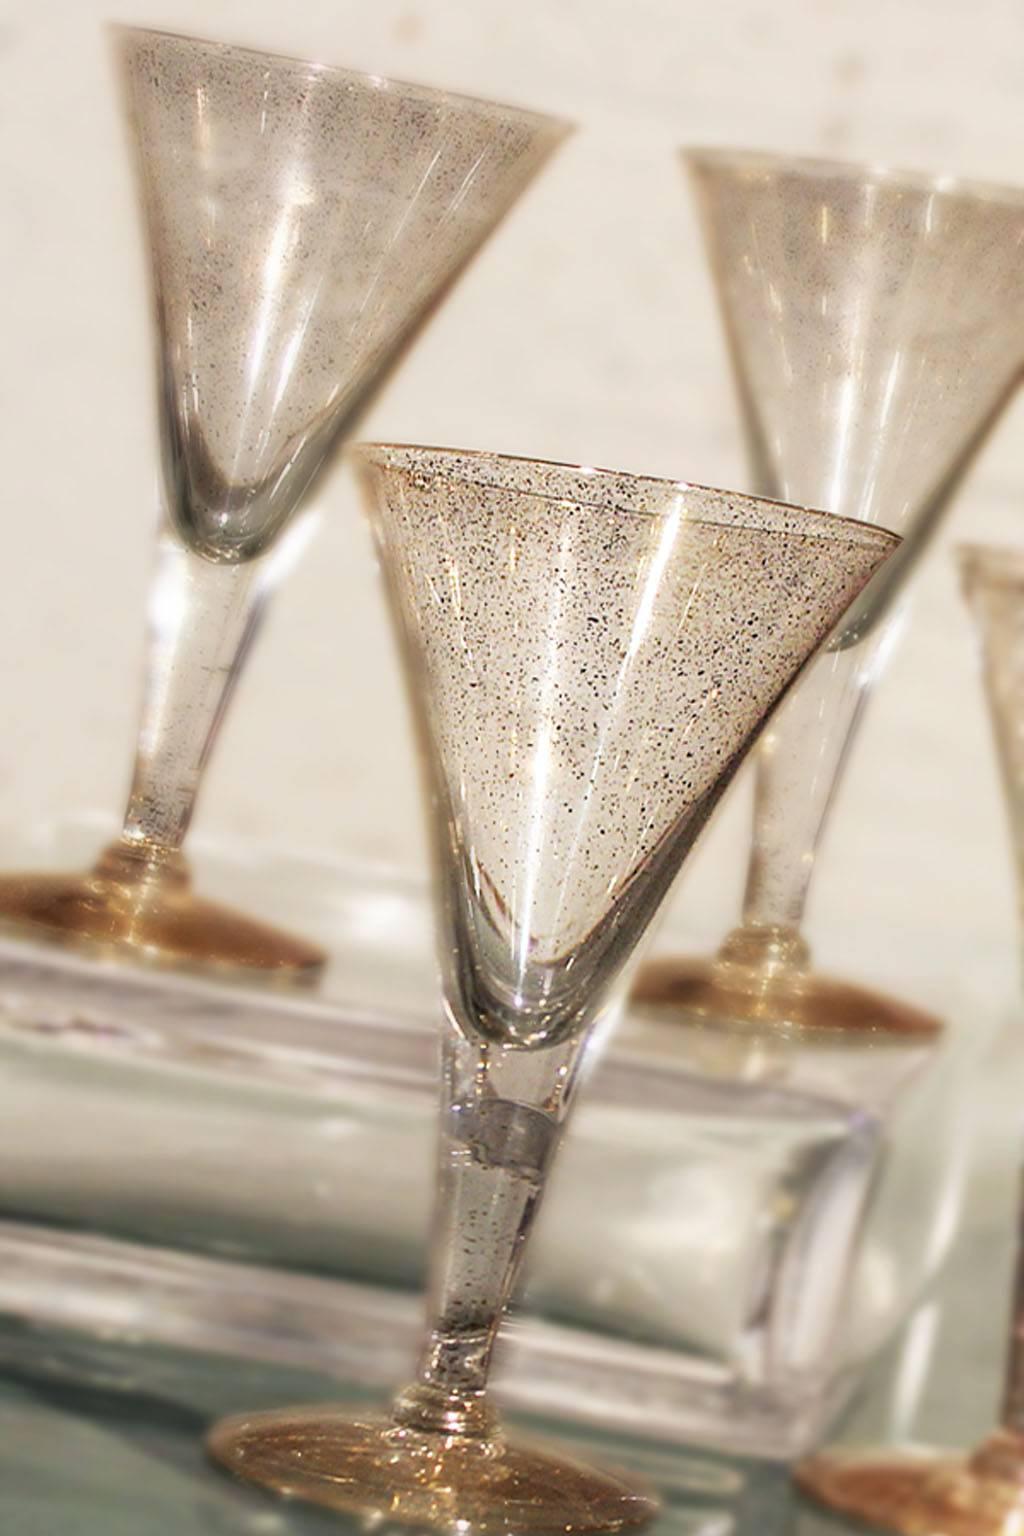 Wonderful and glamorous set of five Dorothy C. Thorpe Gold Fleck small champagne, wine or cordial stemware glasses. These are in wonderful vintage condition.

I'm so in love with the glamour of this set of five gold fleck small champagne flutes or